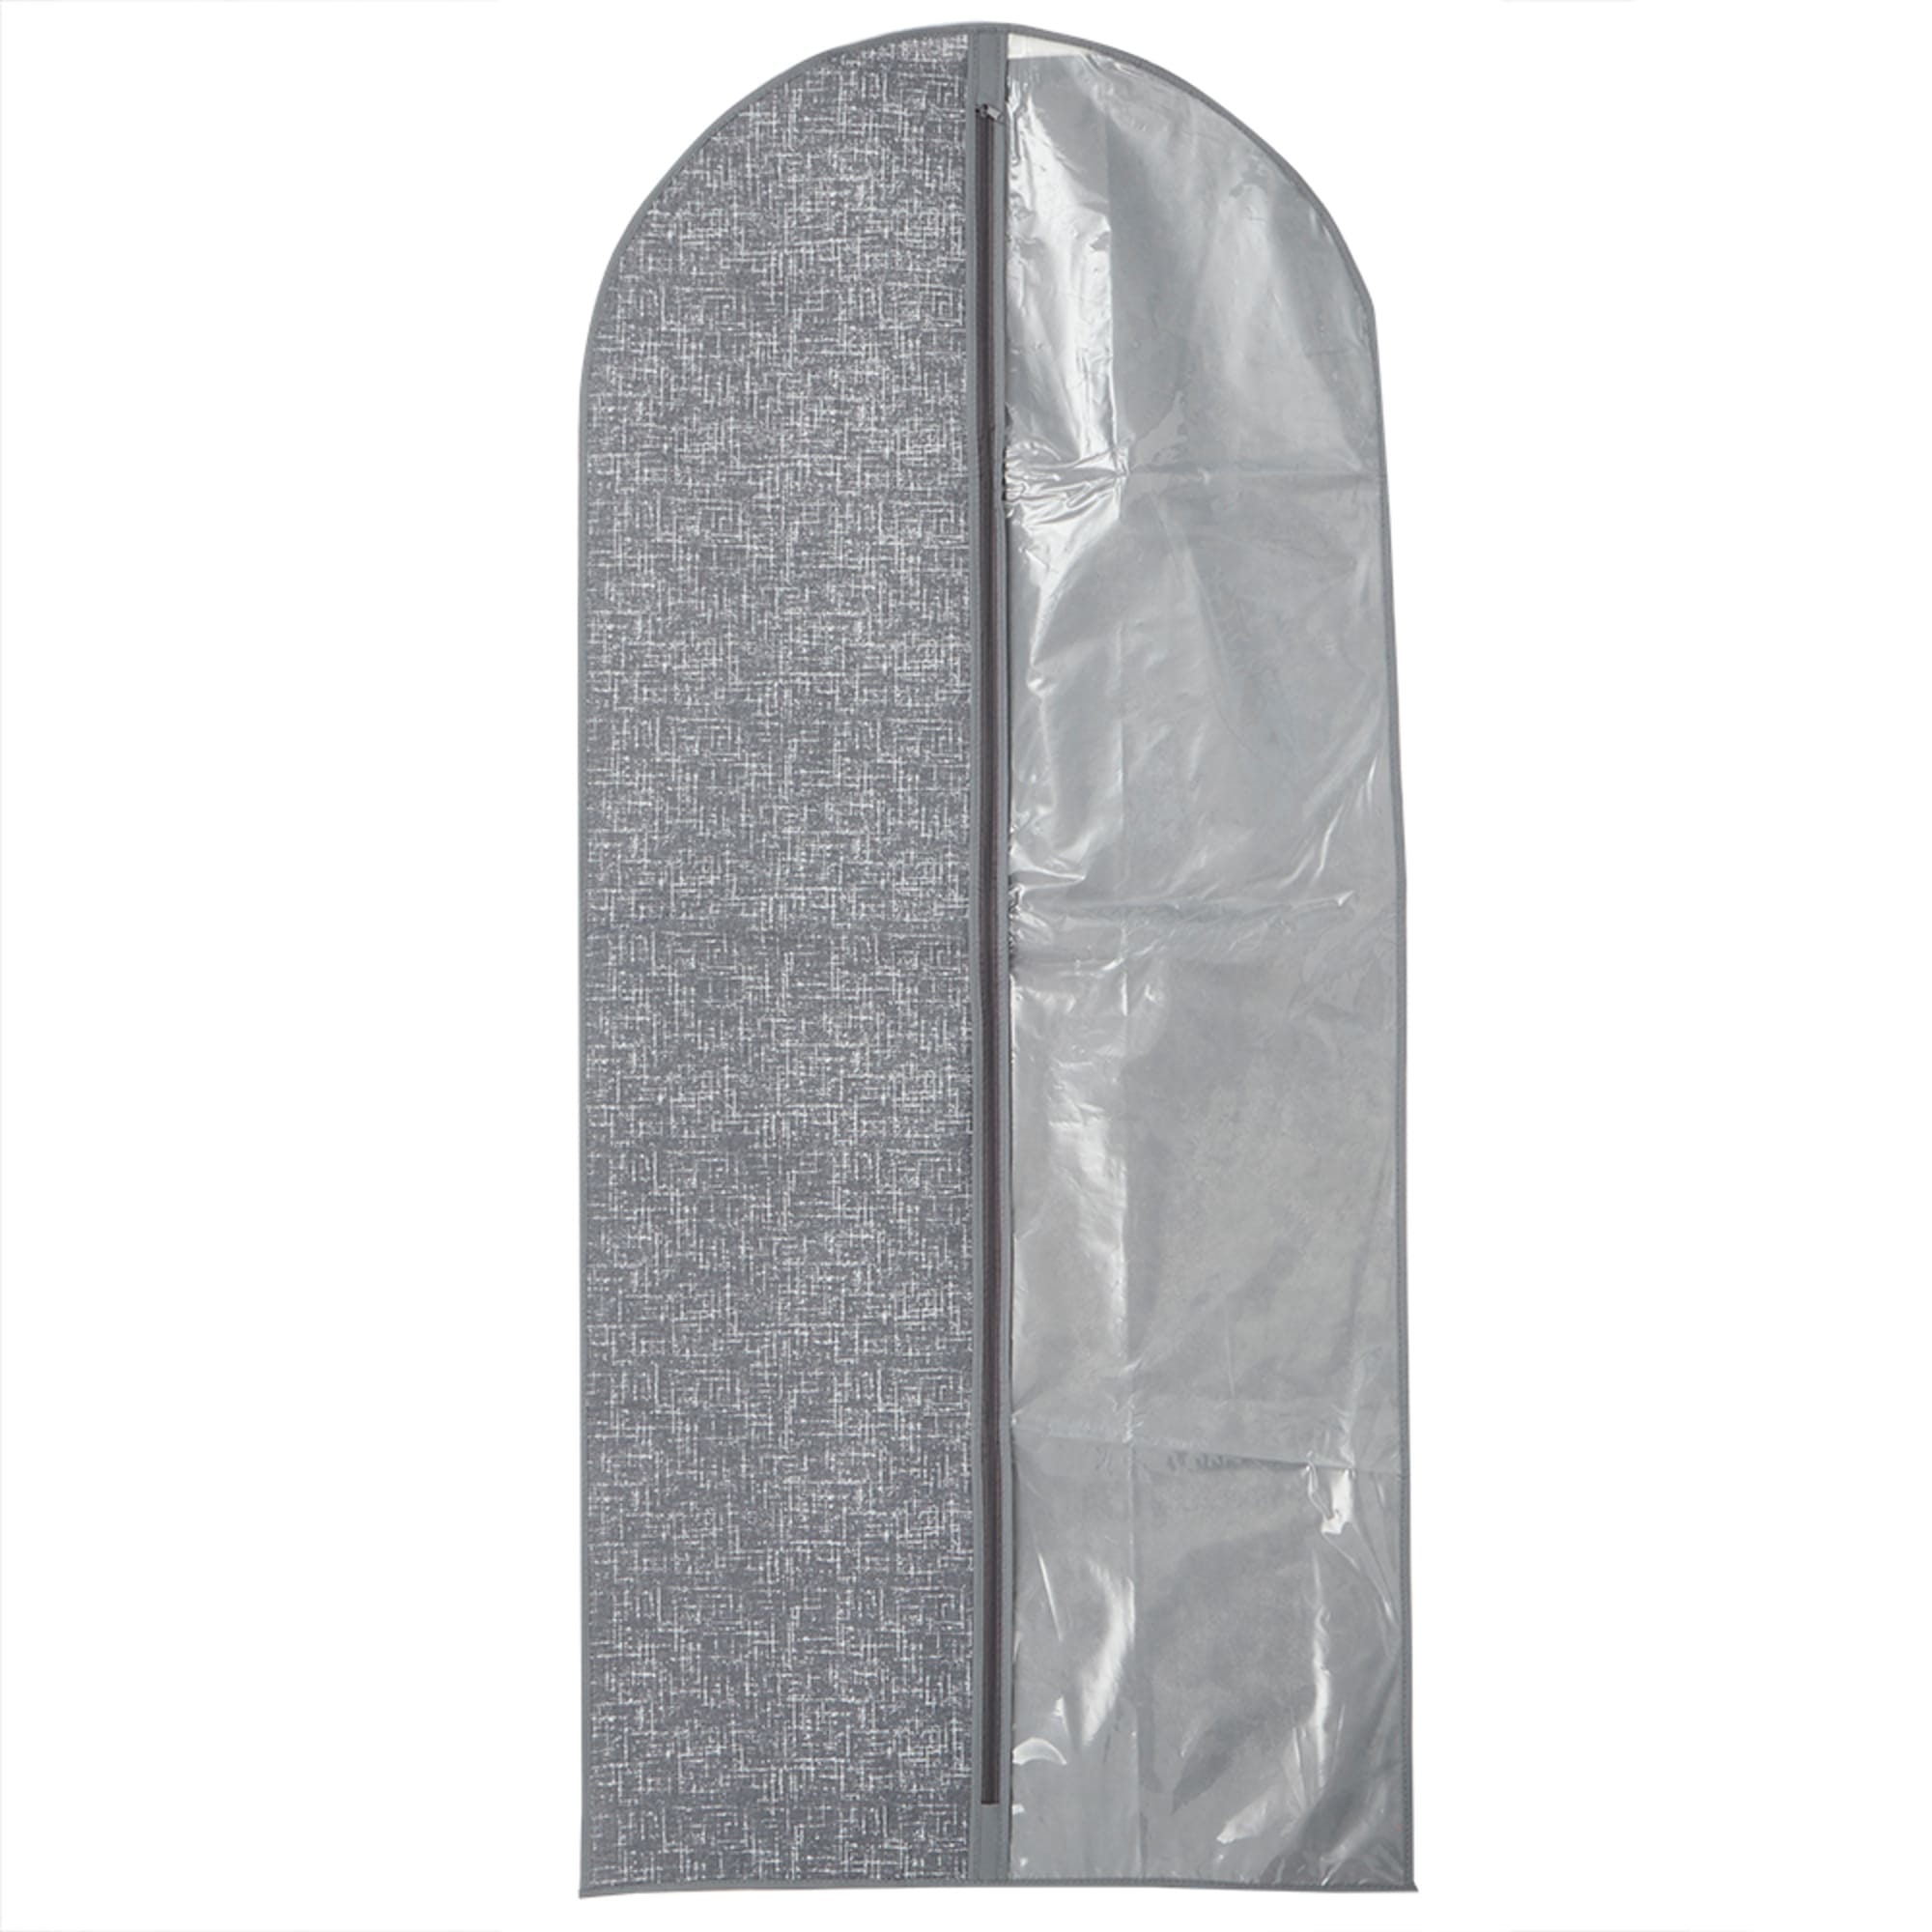 Home Basics Graph Line Non-Woven Garment Bag with Clear Plastic Panel, Grey $3.00 EACH, CASE PACK OF 12